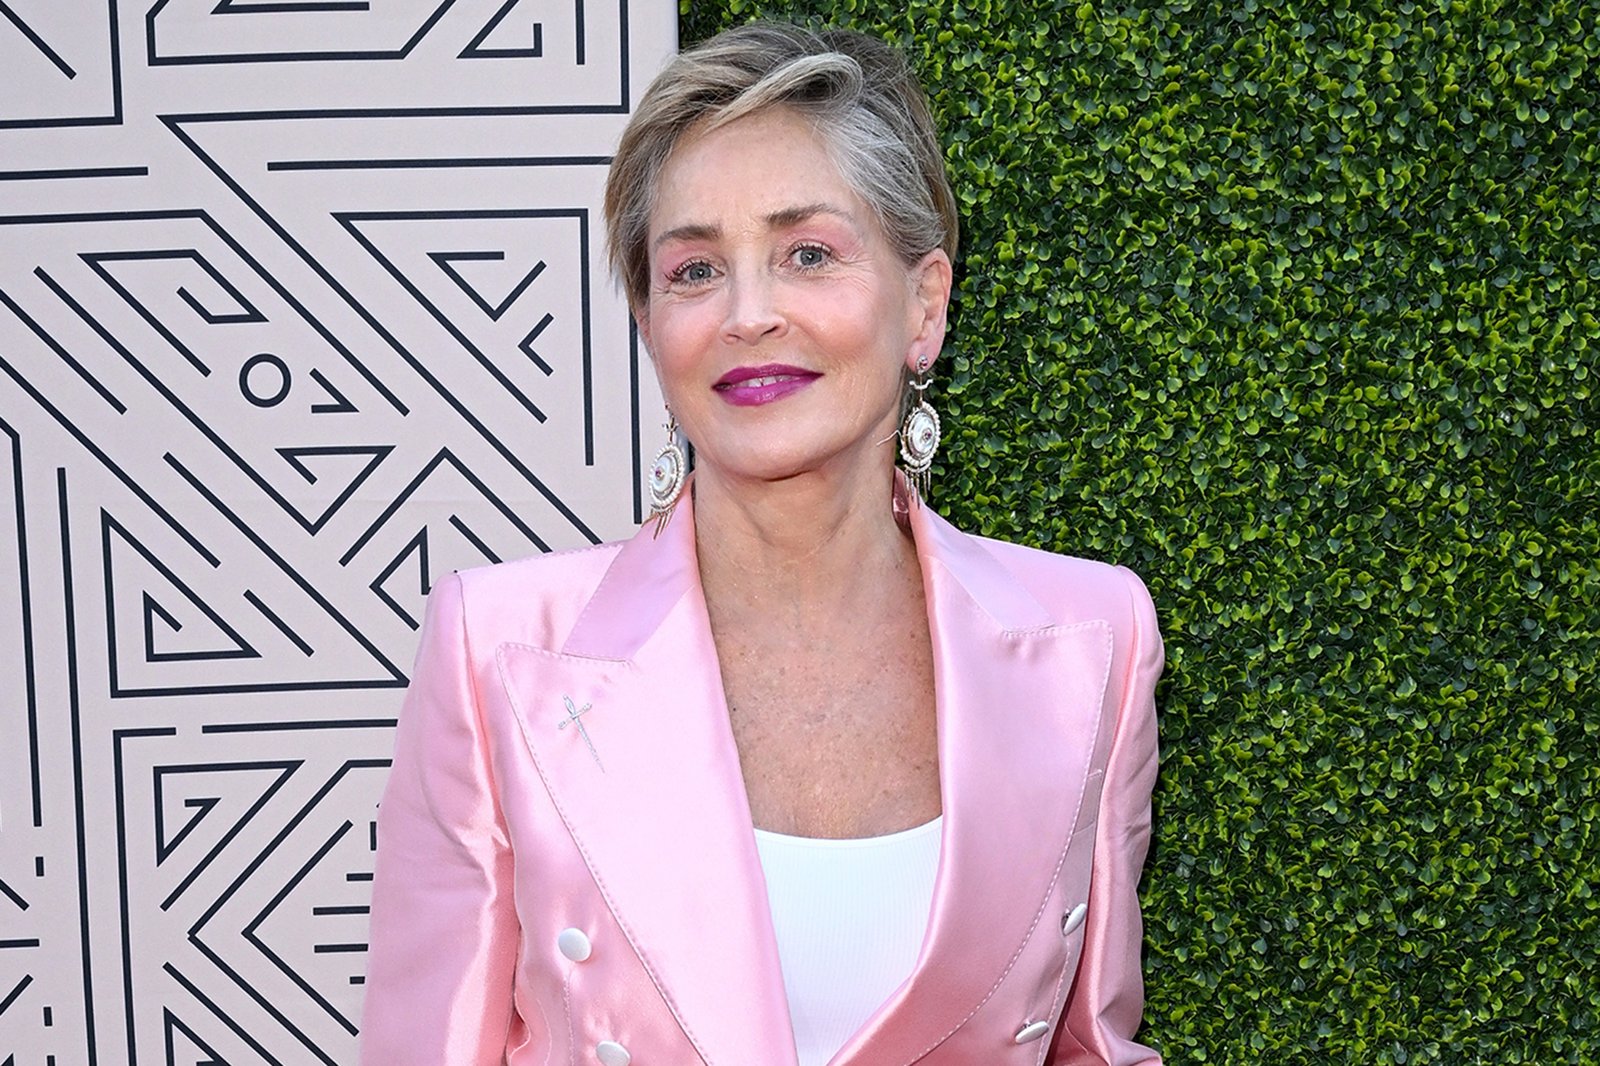 Sharon Stone finds she has suffered 9 miscarriages